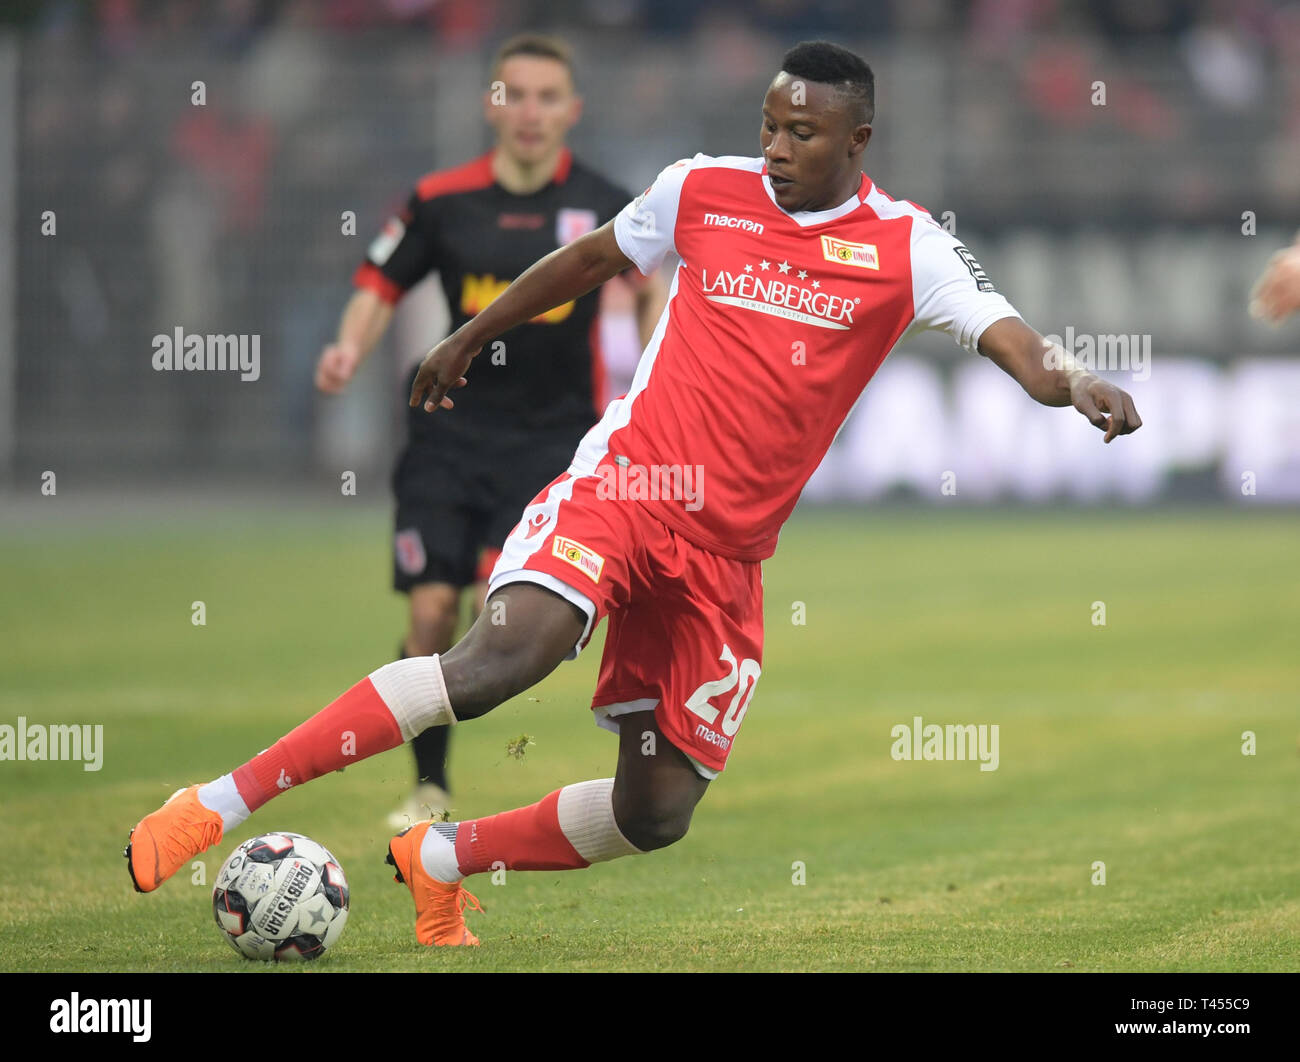 Berlin, Germany. 12th Apr, 2019. Soccer: 2nd Bundesliga, 1st FC Union Berlin - Jahn Regensburg, 29th matchday, at the Alte Försterei. Unions Suleiman Abdullahi on the ball. Credit: Jörg Carstensen/dpa - IMPORTANT NOTE: In accordance with the requirements of the DFL Deutsche Fußball Liga or the DFB Deutscher Fußball-Bund, it is prohibited to use or have used photographs taken in the stadium and/or the match in the form of sequence images and/or video-like photo sequences./dpa/Alamy Live News Stock Photo